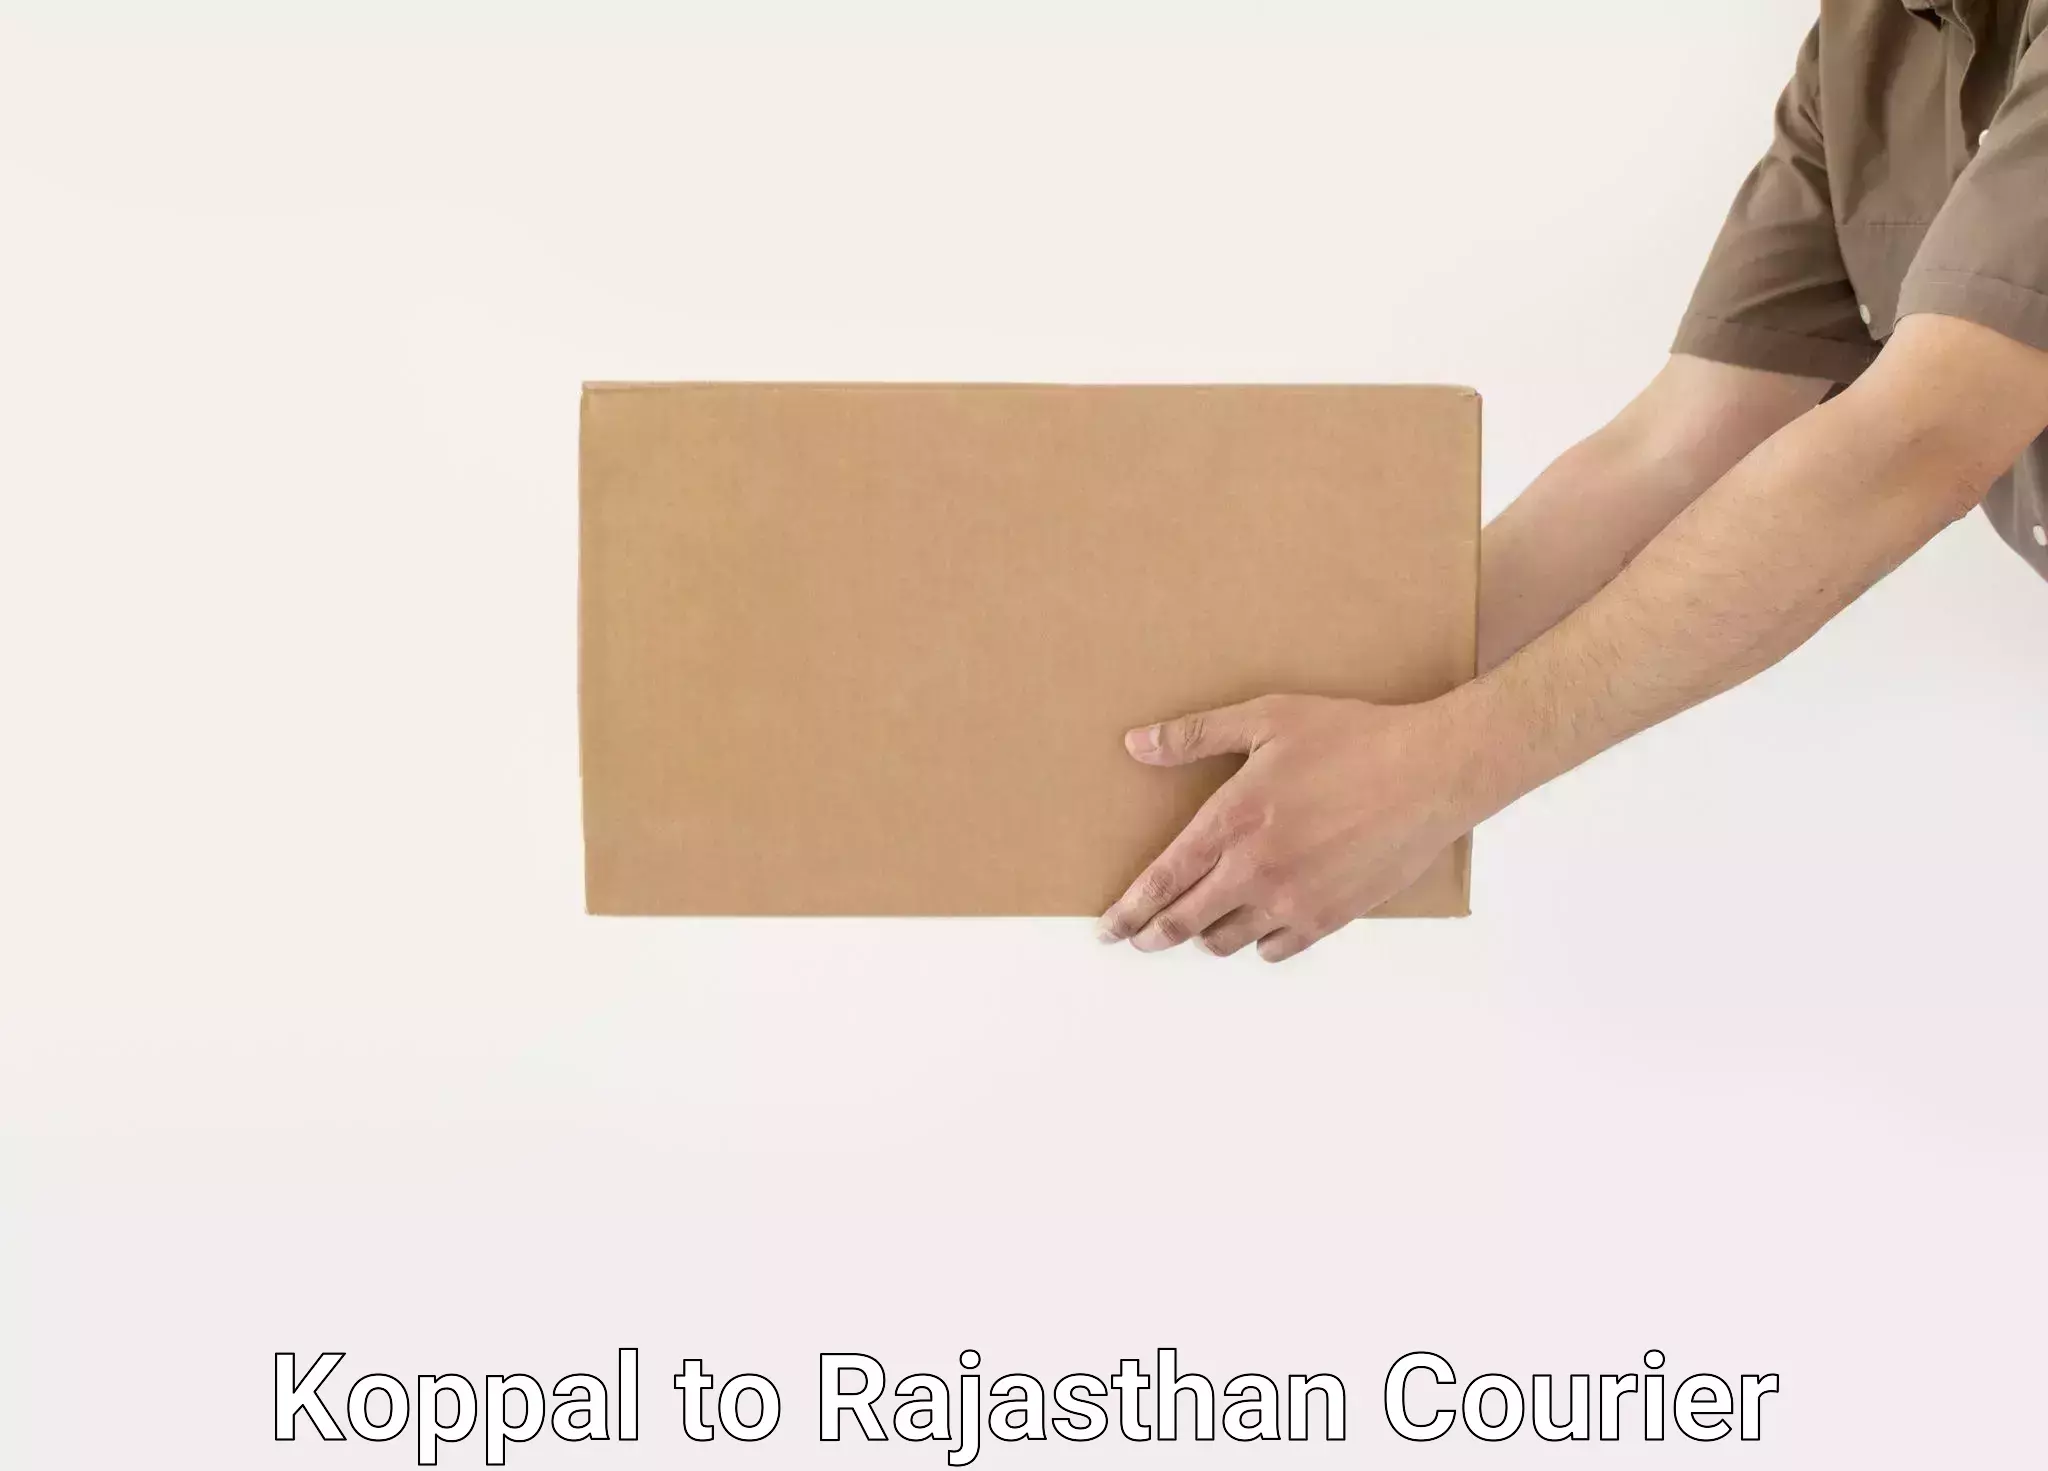 Quality relocation assistance Koppal to Rajasthan